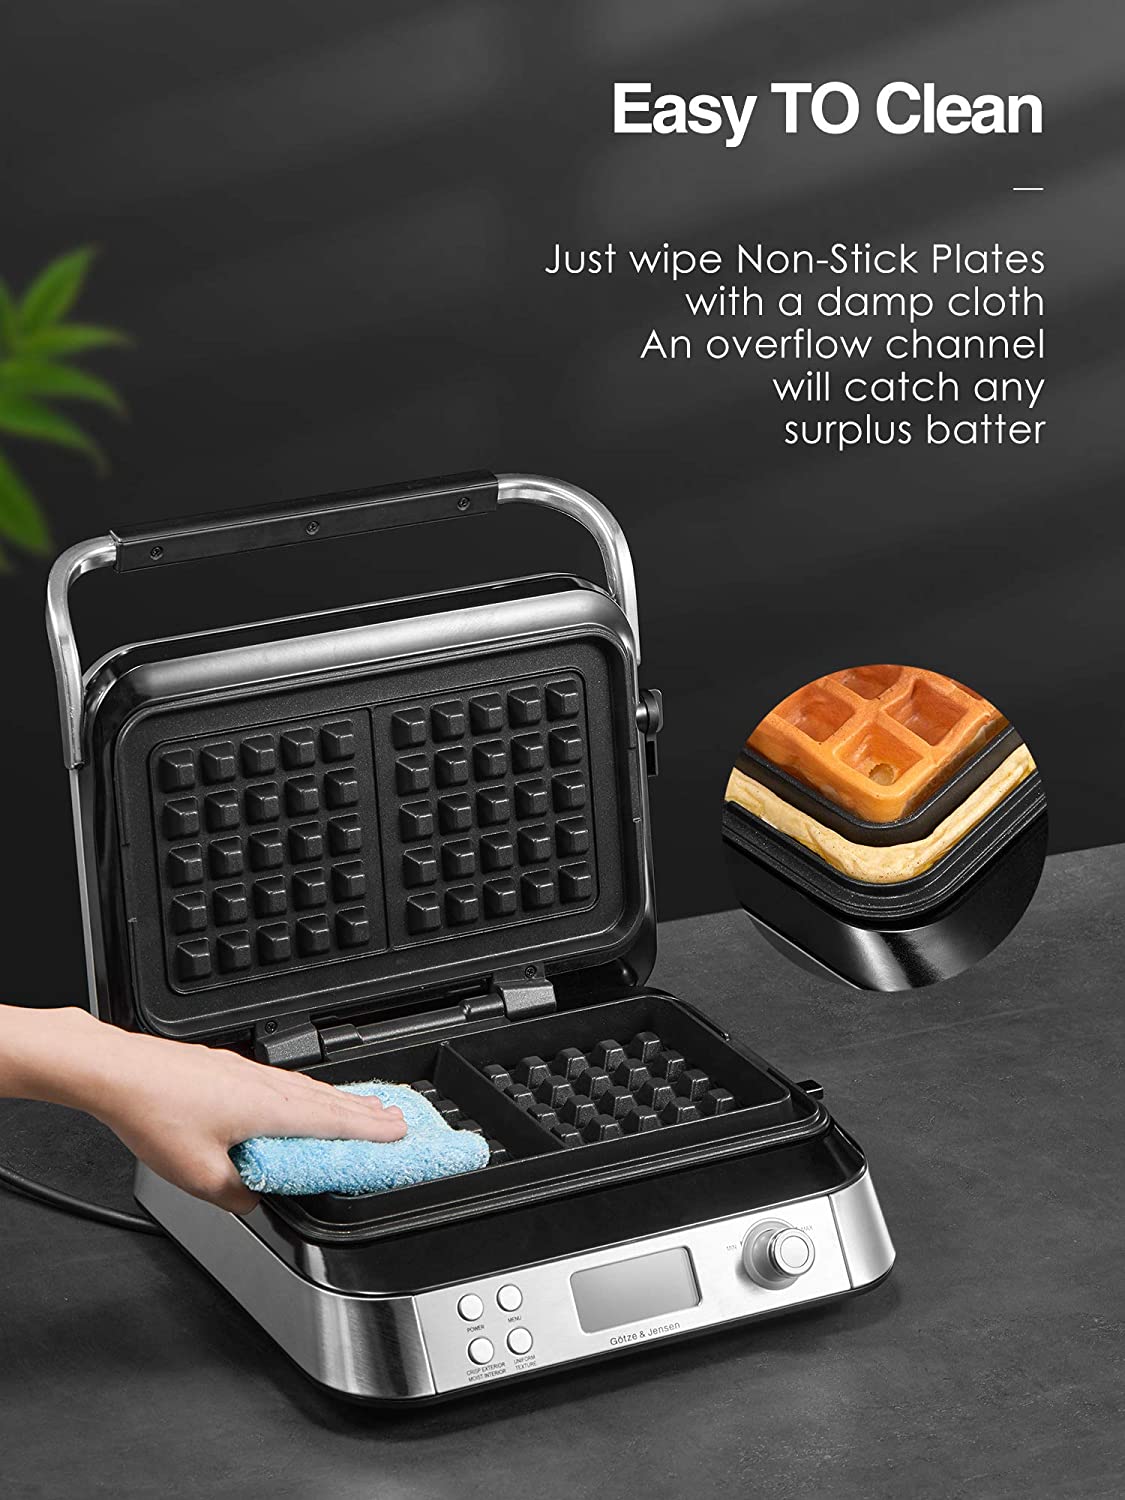 AICOOK | Waffle Maker 1600w, Smart Pro Belgian Waffle Iron with LCD Display, 2-Slice, 5 Different Programs, 7 Browning Levels, Recipe Included, Silver, Easy To Clean